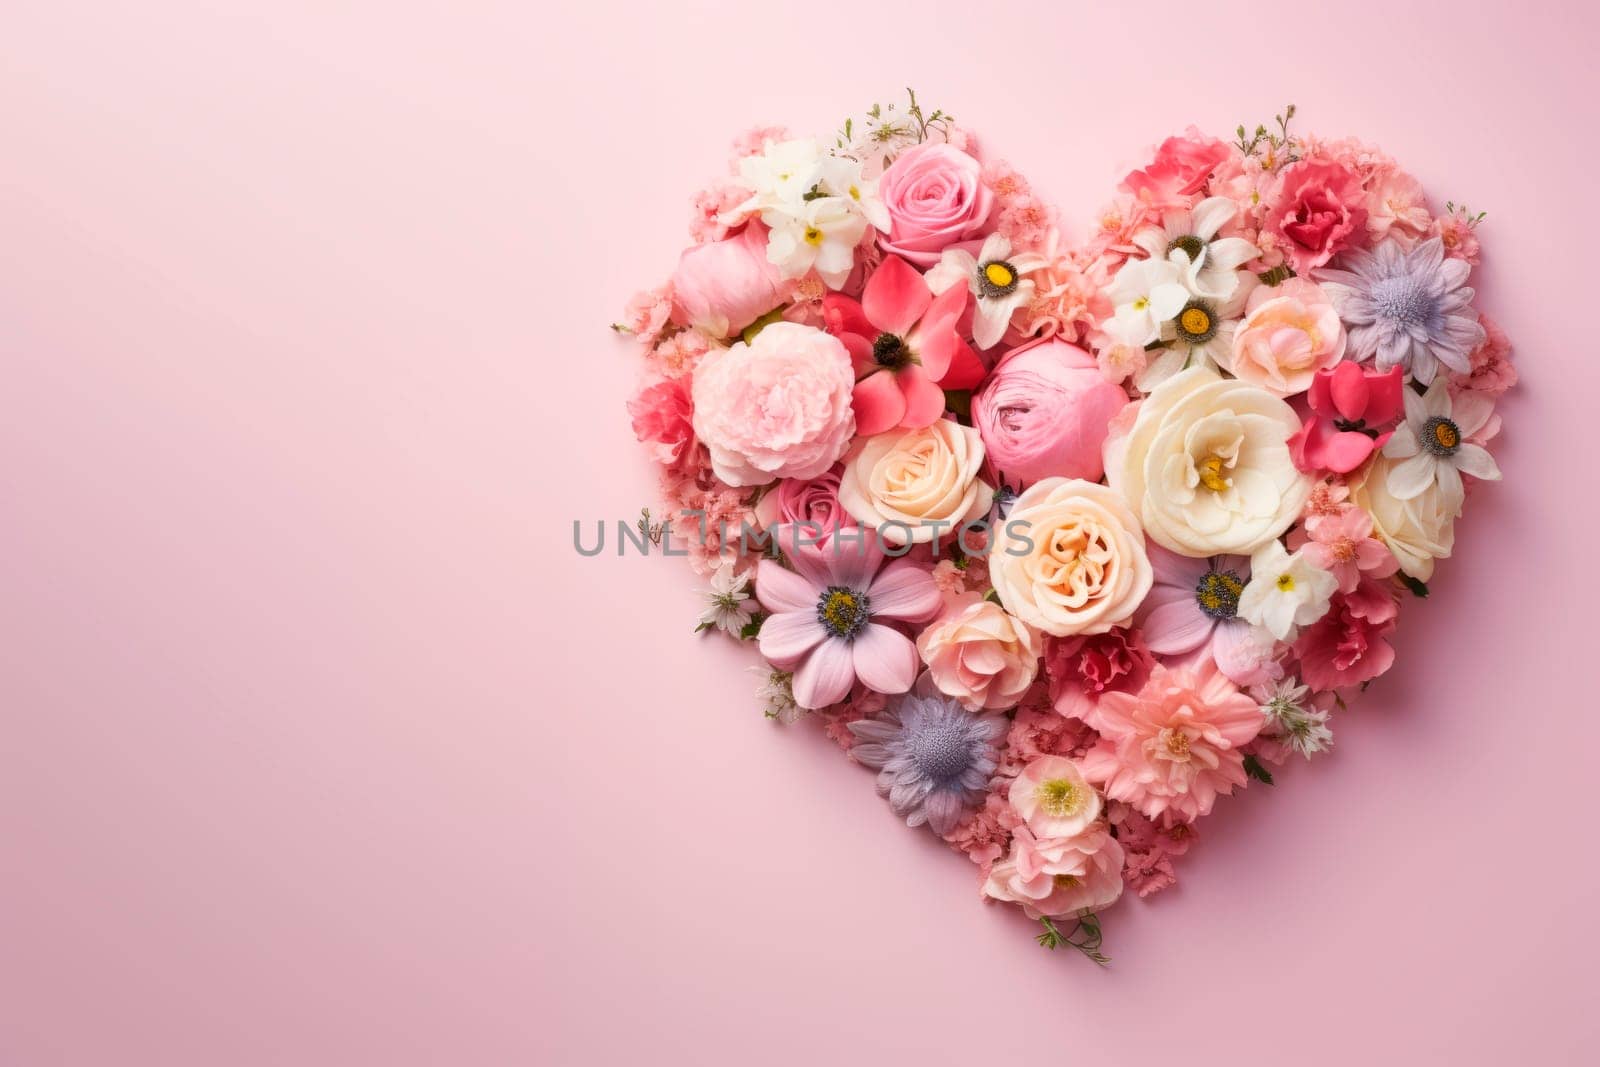 A variety of pink and white flowers are laid out in the shape of a heart on a pink background. by Spirina